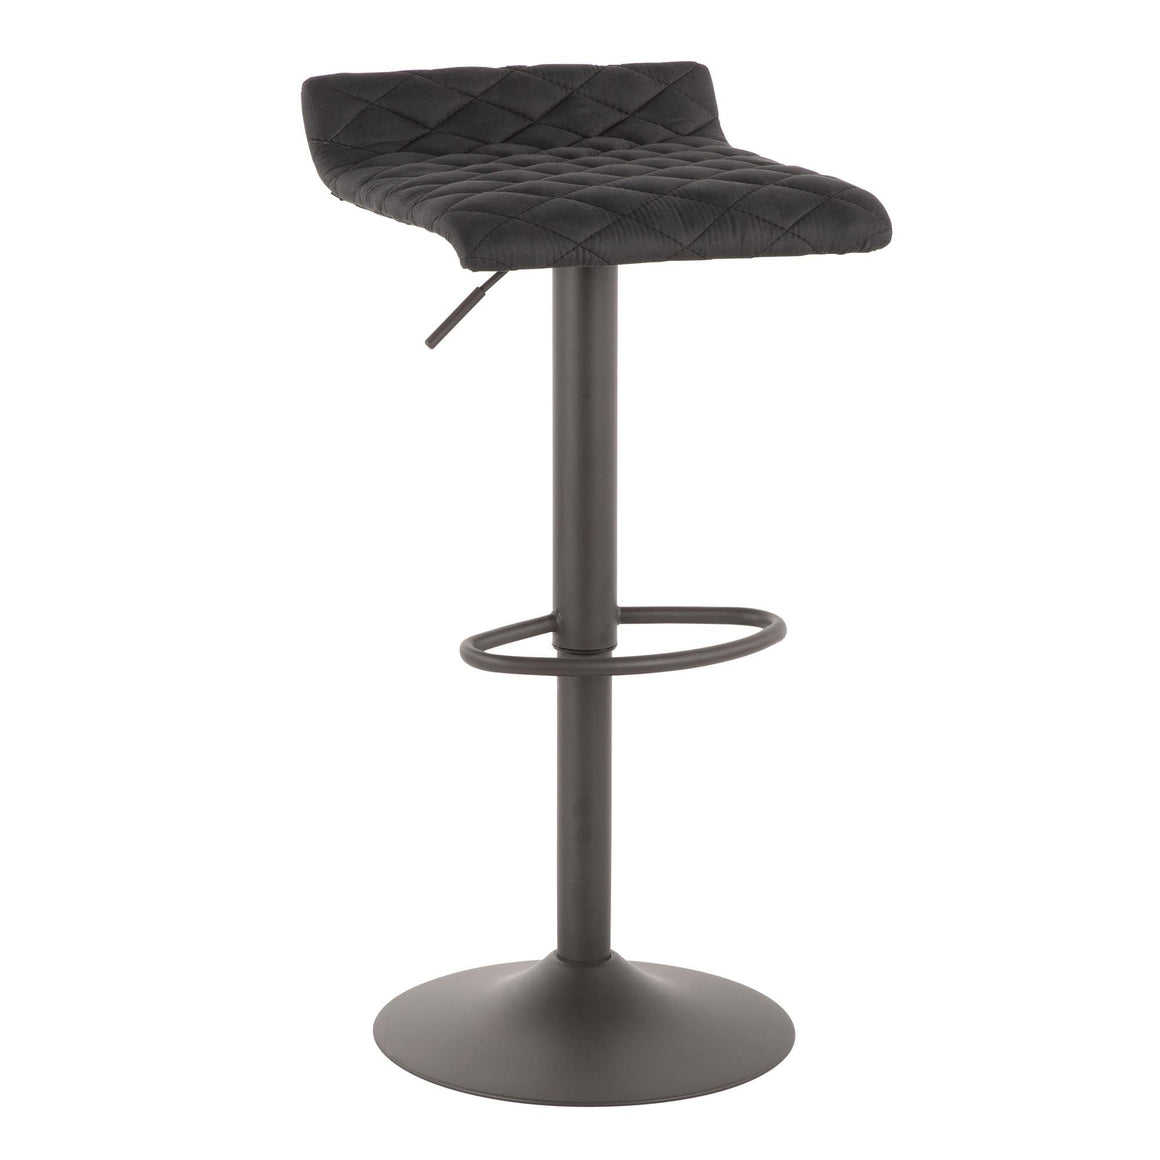 Cavale Industrial Barstool in Matte Grey and Black Cowboy Fabric by LumiSource